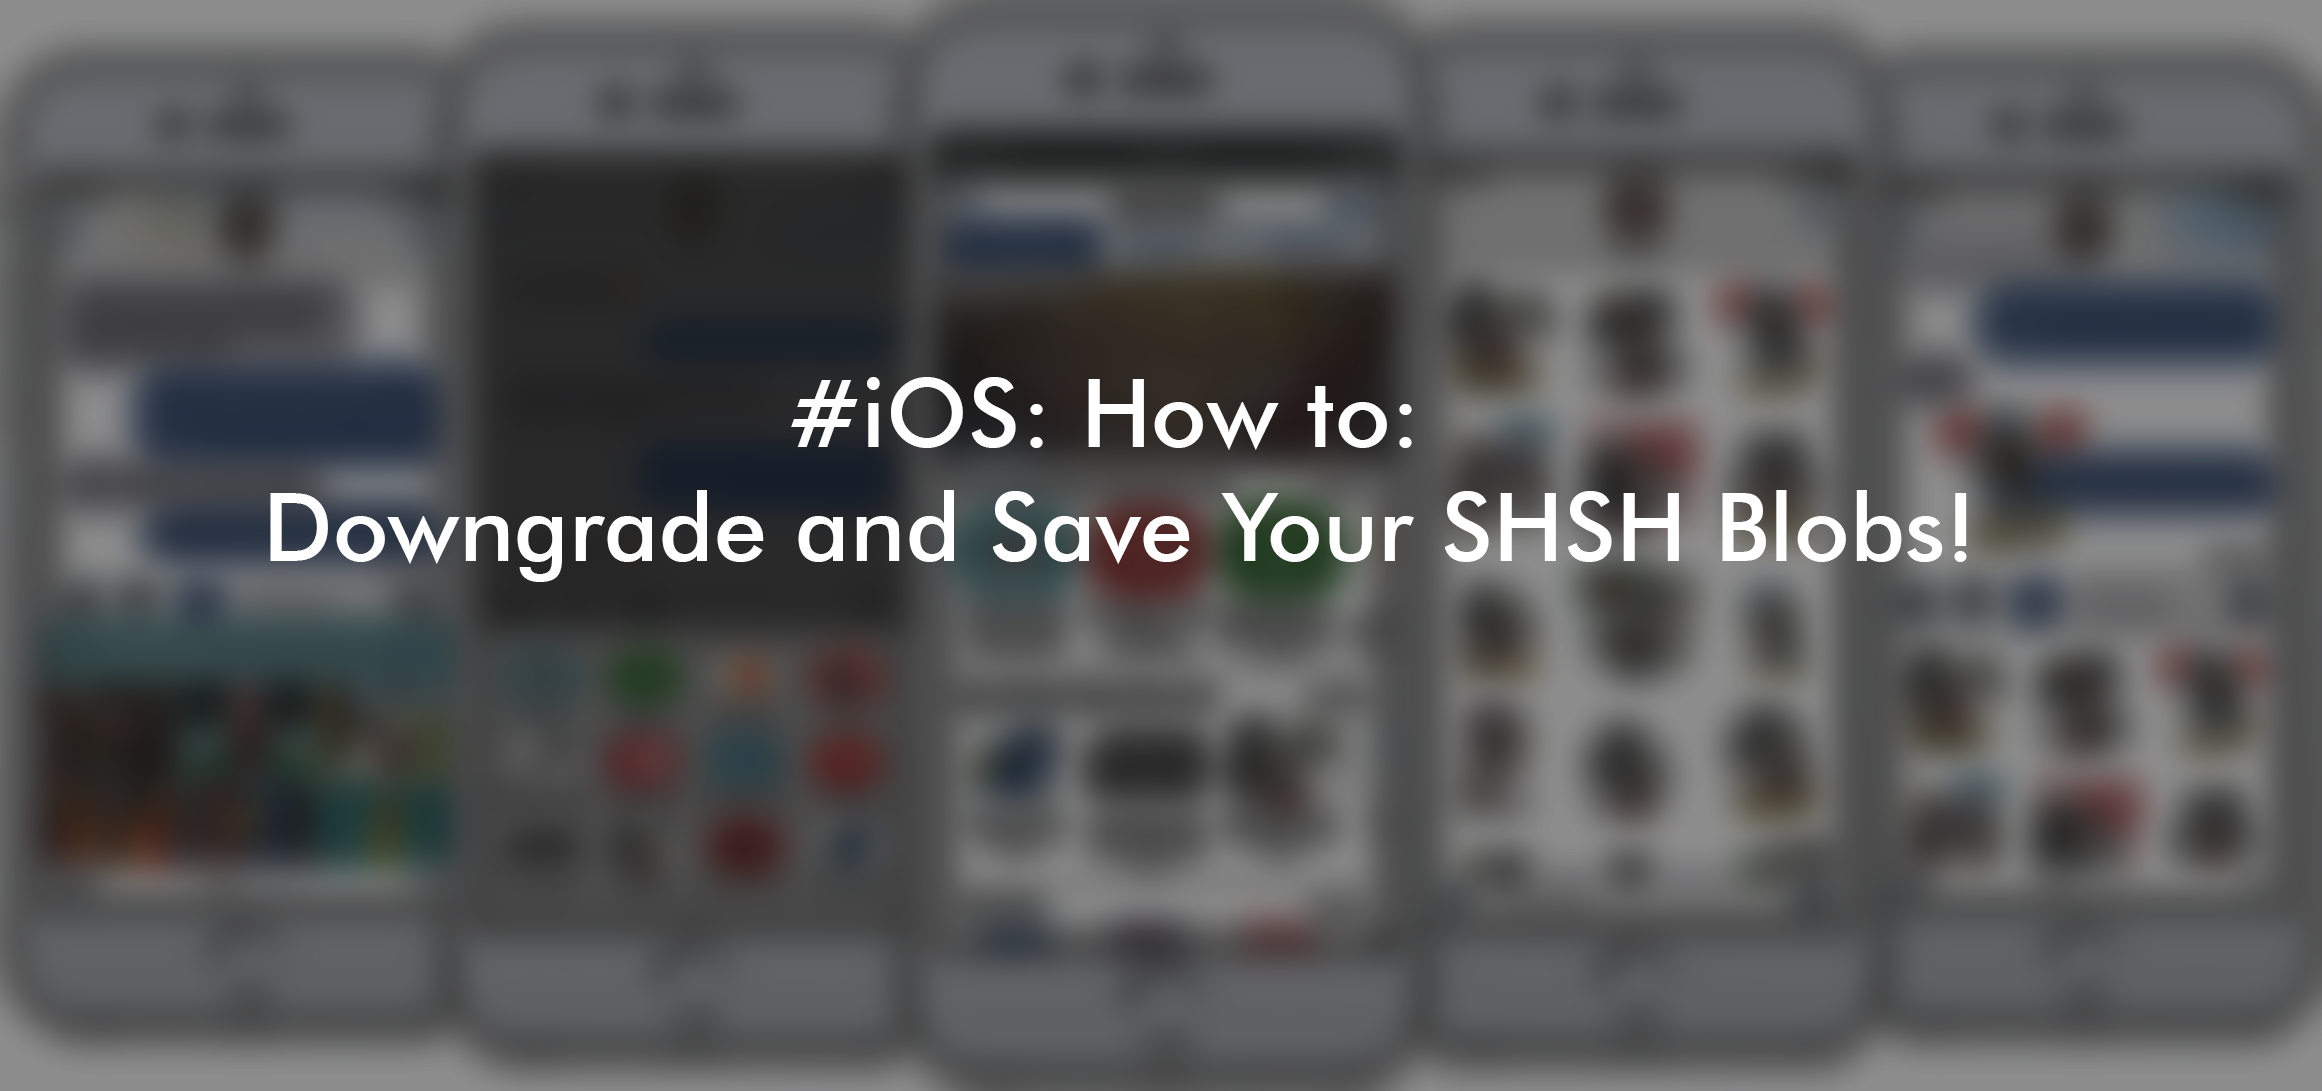 iOS Guide: How To Downgrade And Save SHSH Blobs! | by Metodix | Metodix |  Medium